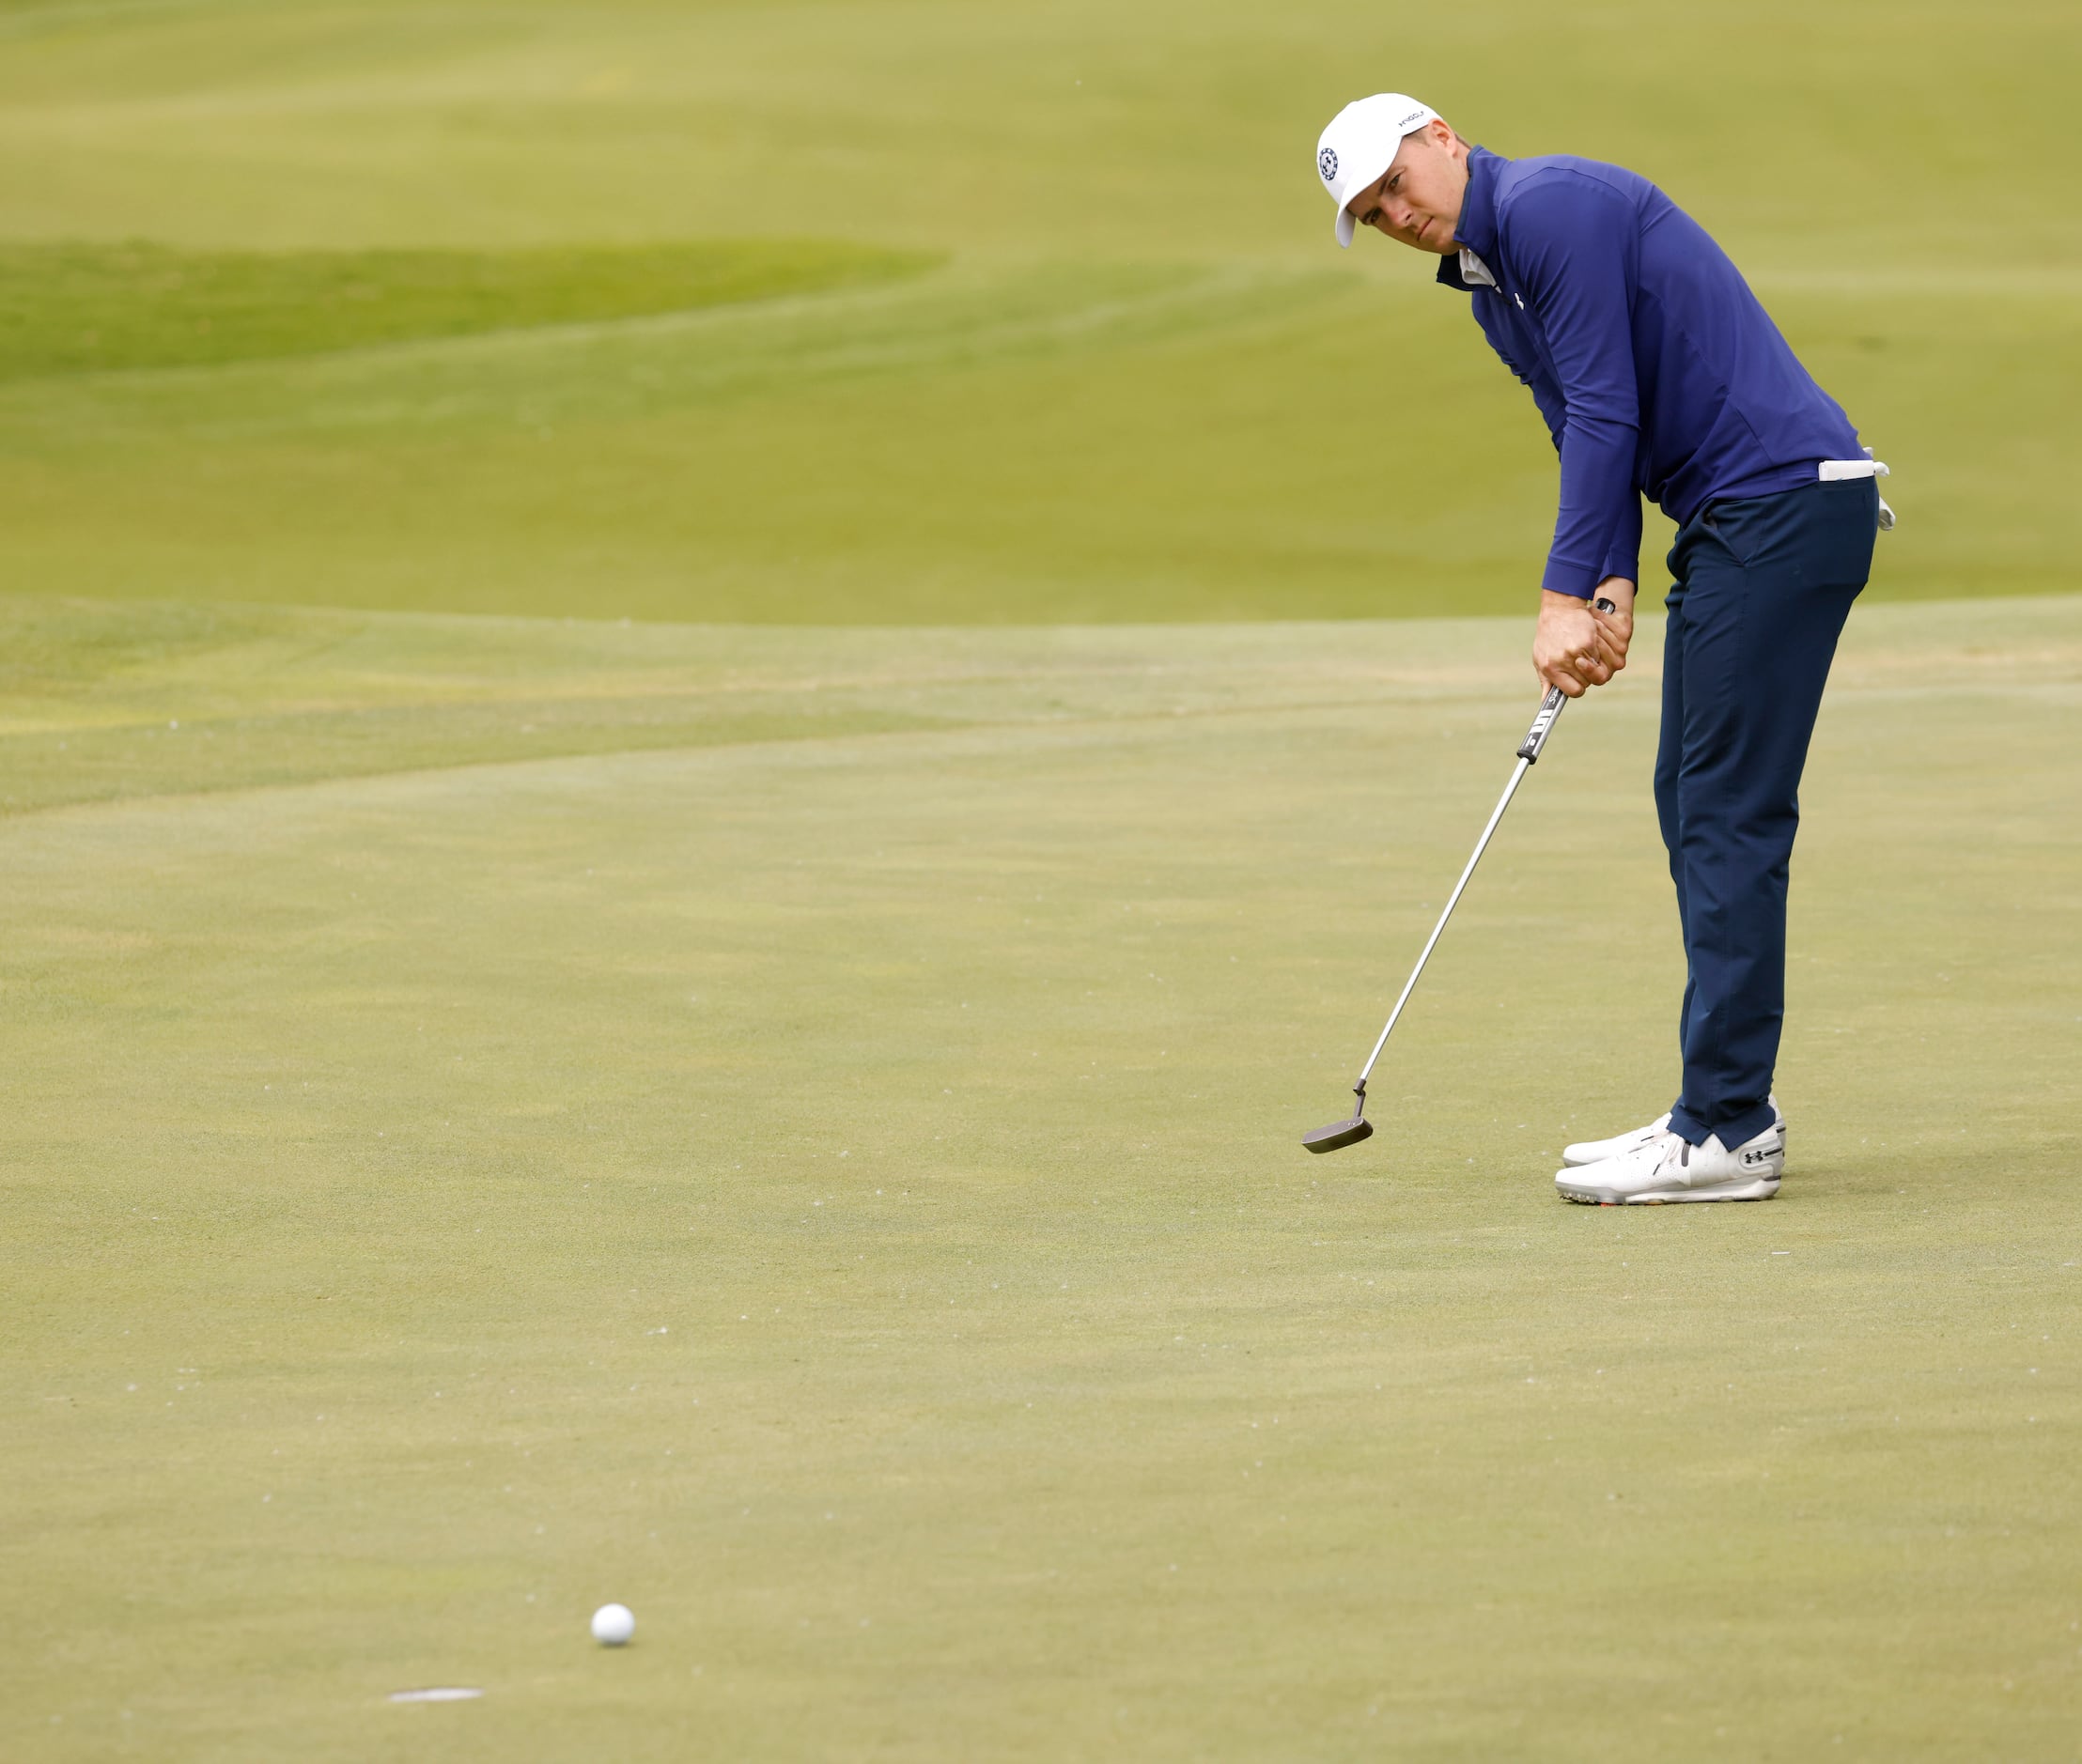 Jordan Spieth putts on the 6th hole during round 2 of the AT&T Byron Nelson  at TPC Craig...